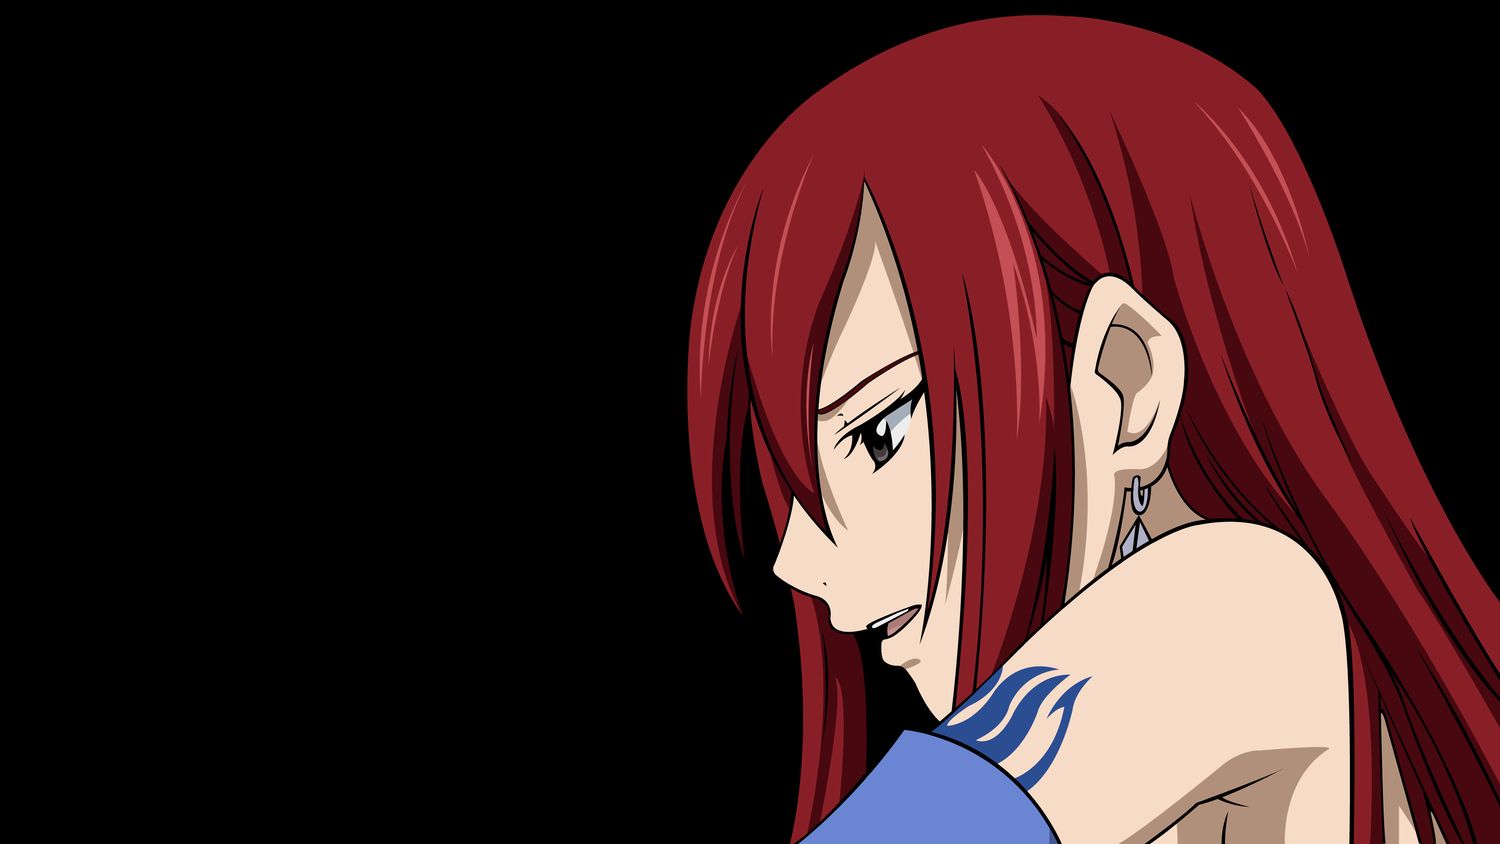 Anime 1500x844 Scarlet Erza Fairy Tail anime girls face profile redhead black background